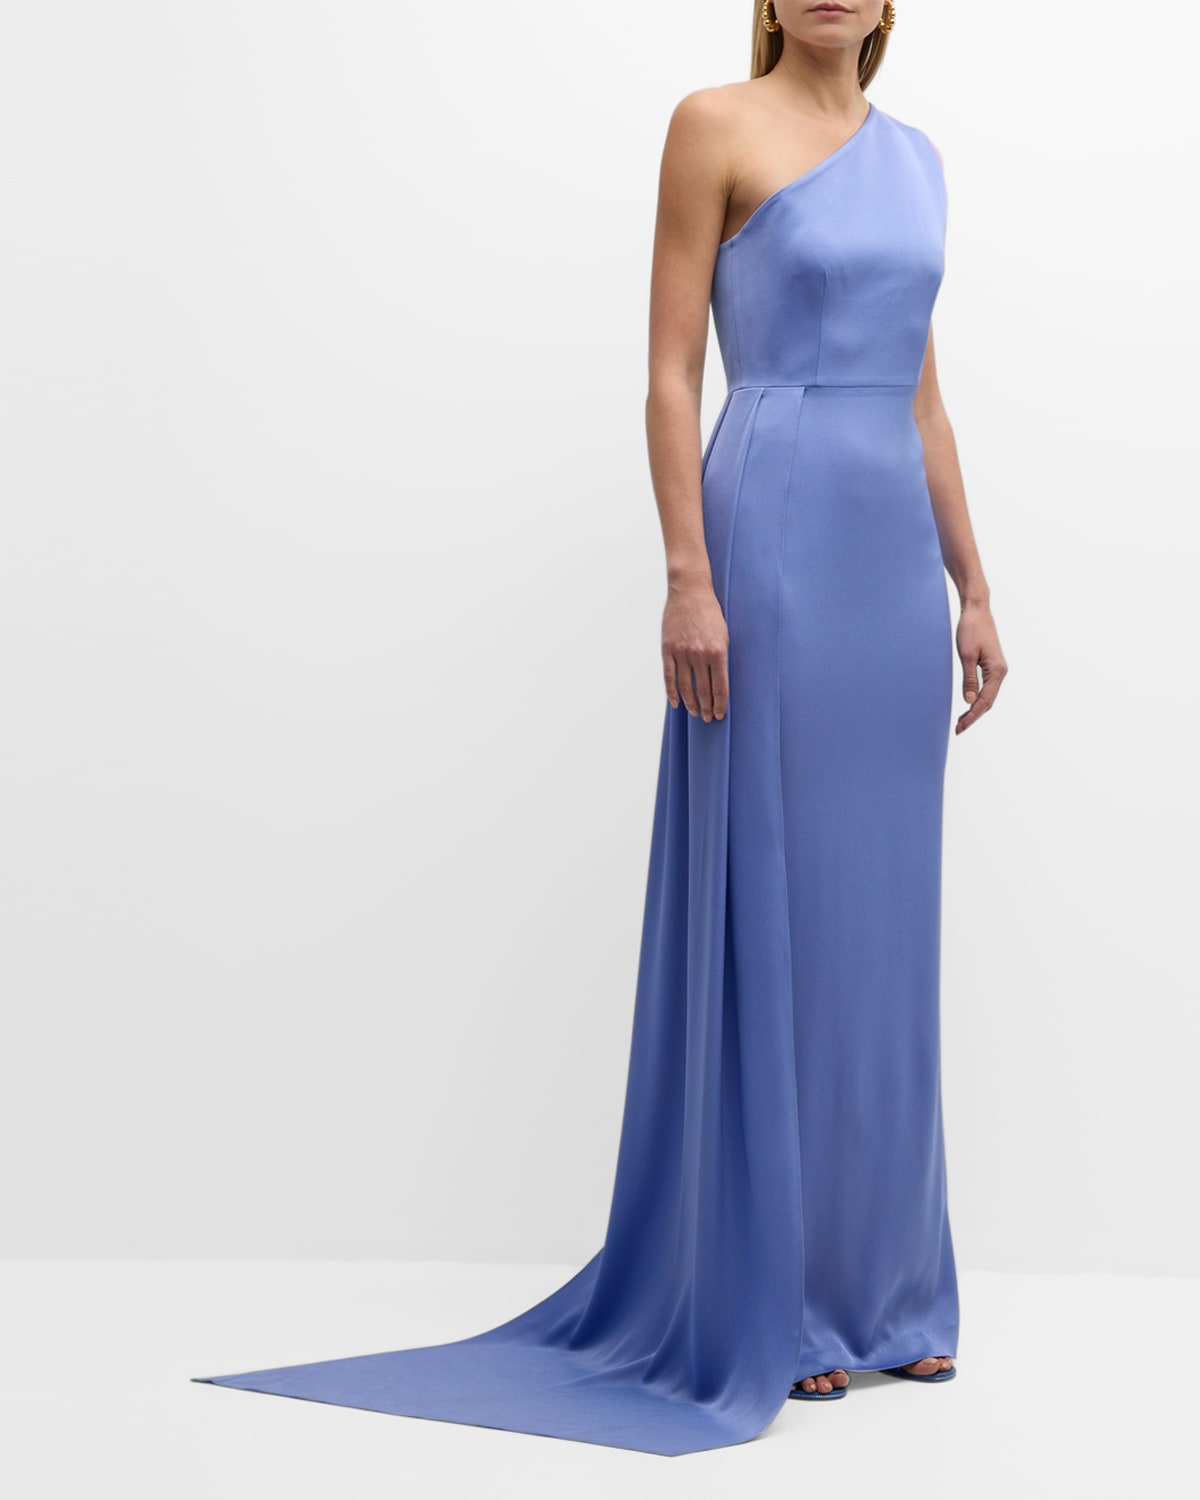 Alex Perry Satin Crepe One-shoulder Column Gown With Sash In Periwinkle